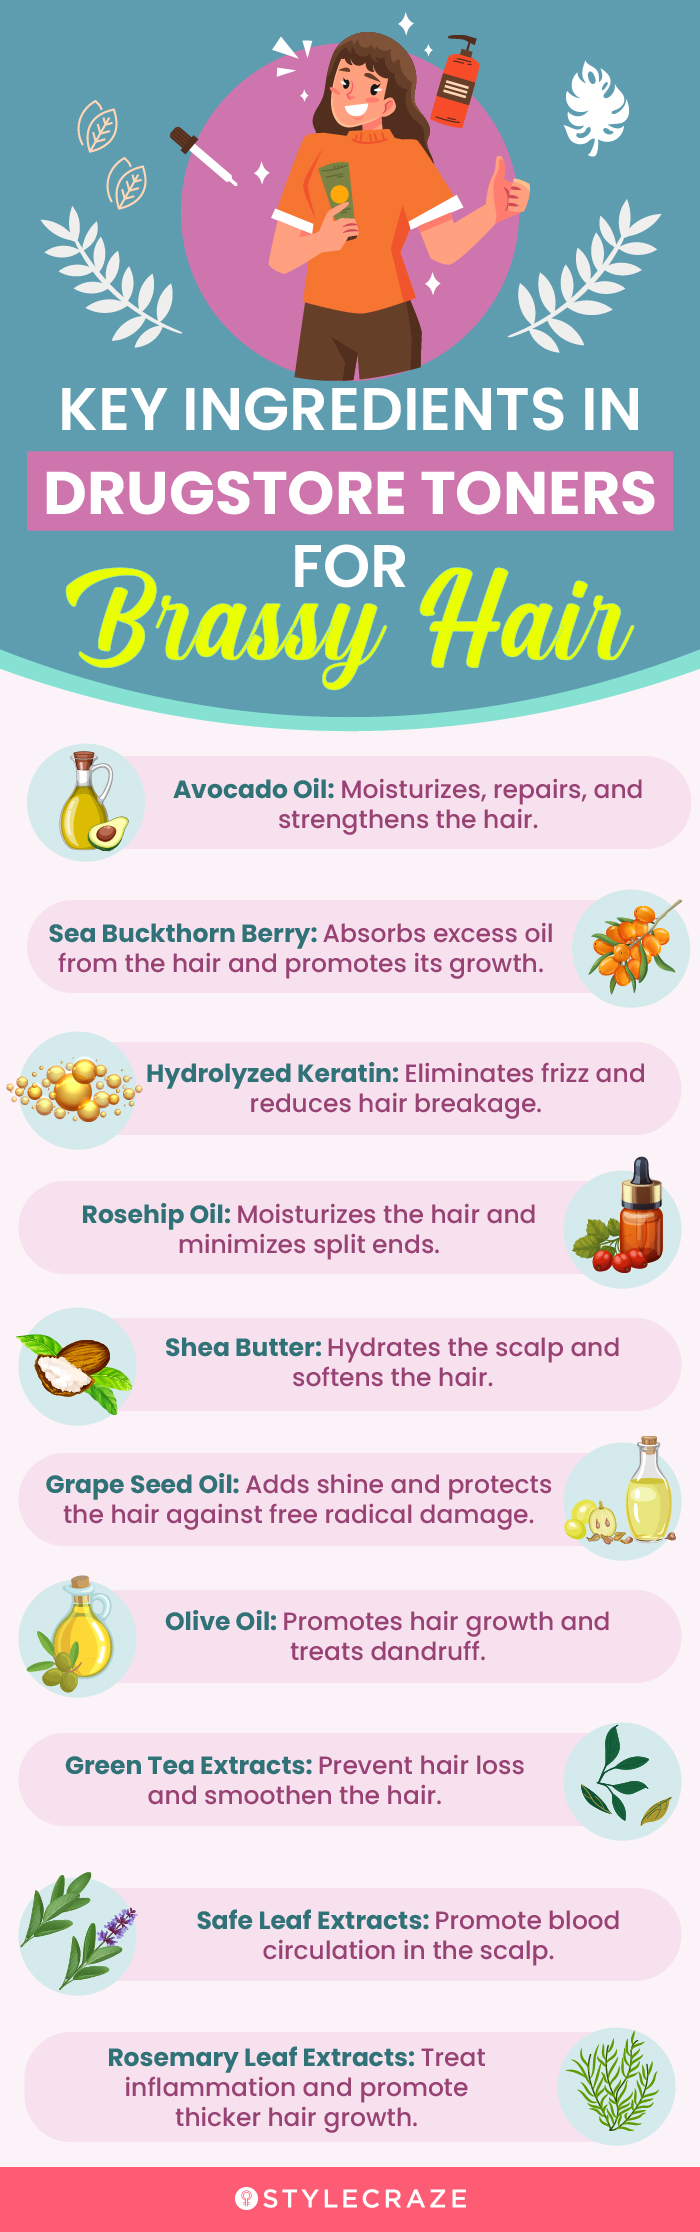 Key Ingredients In Drugstore Toners For Brassy Hair (infographic)